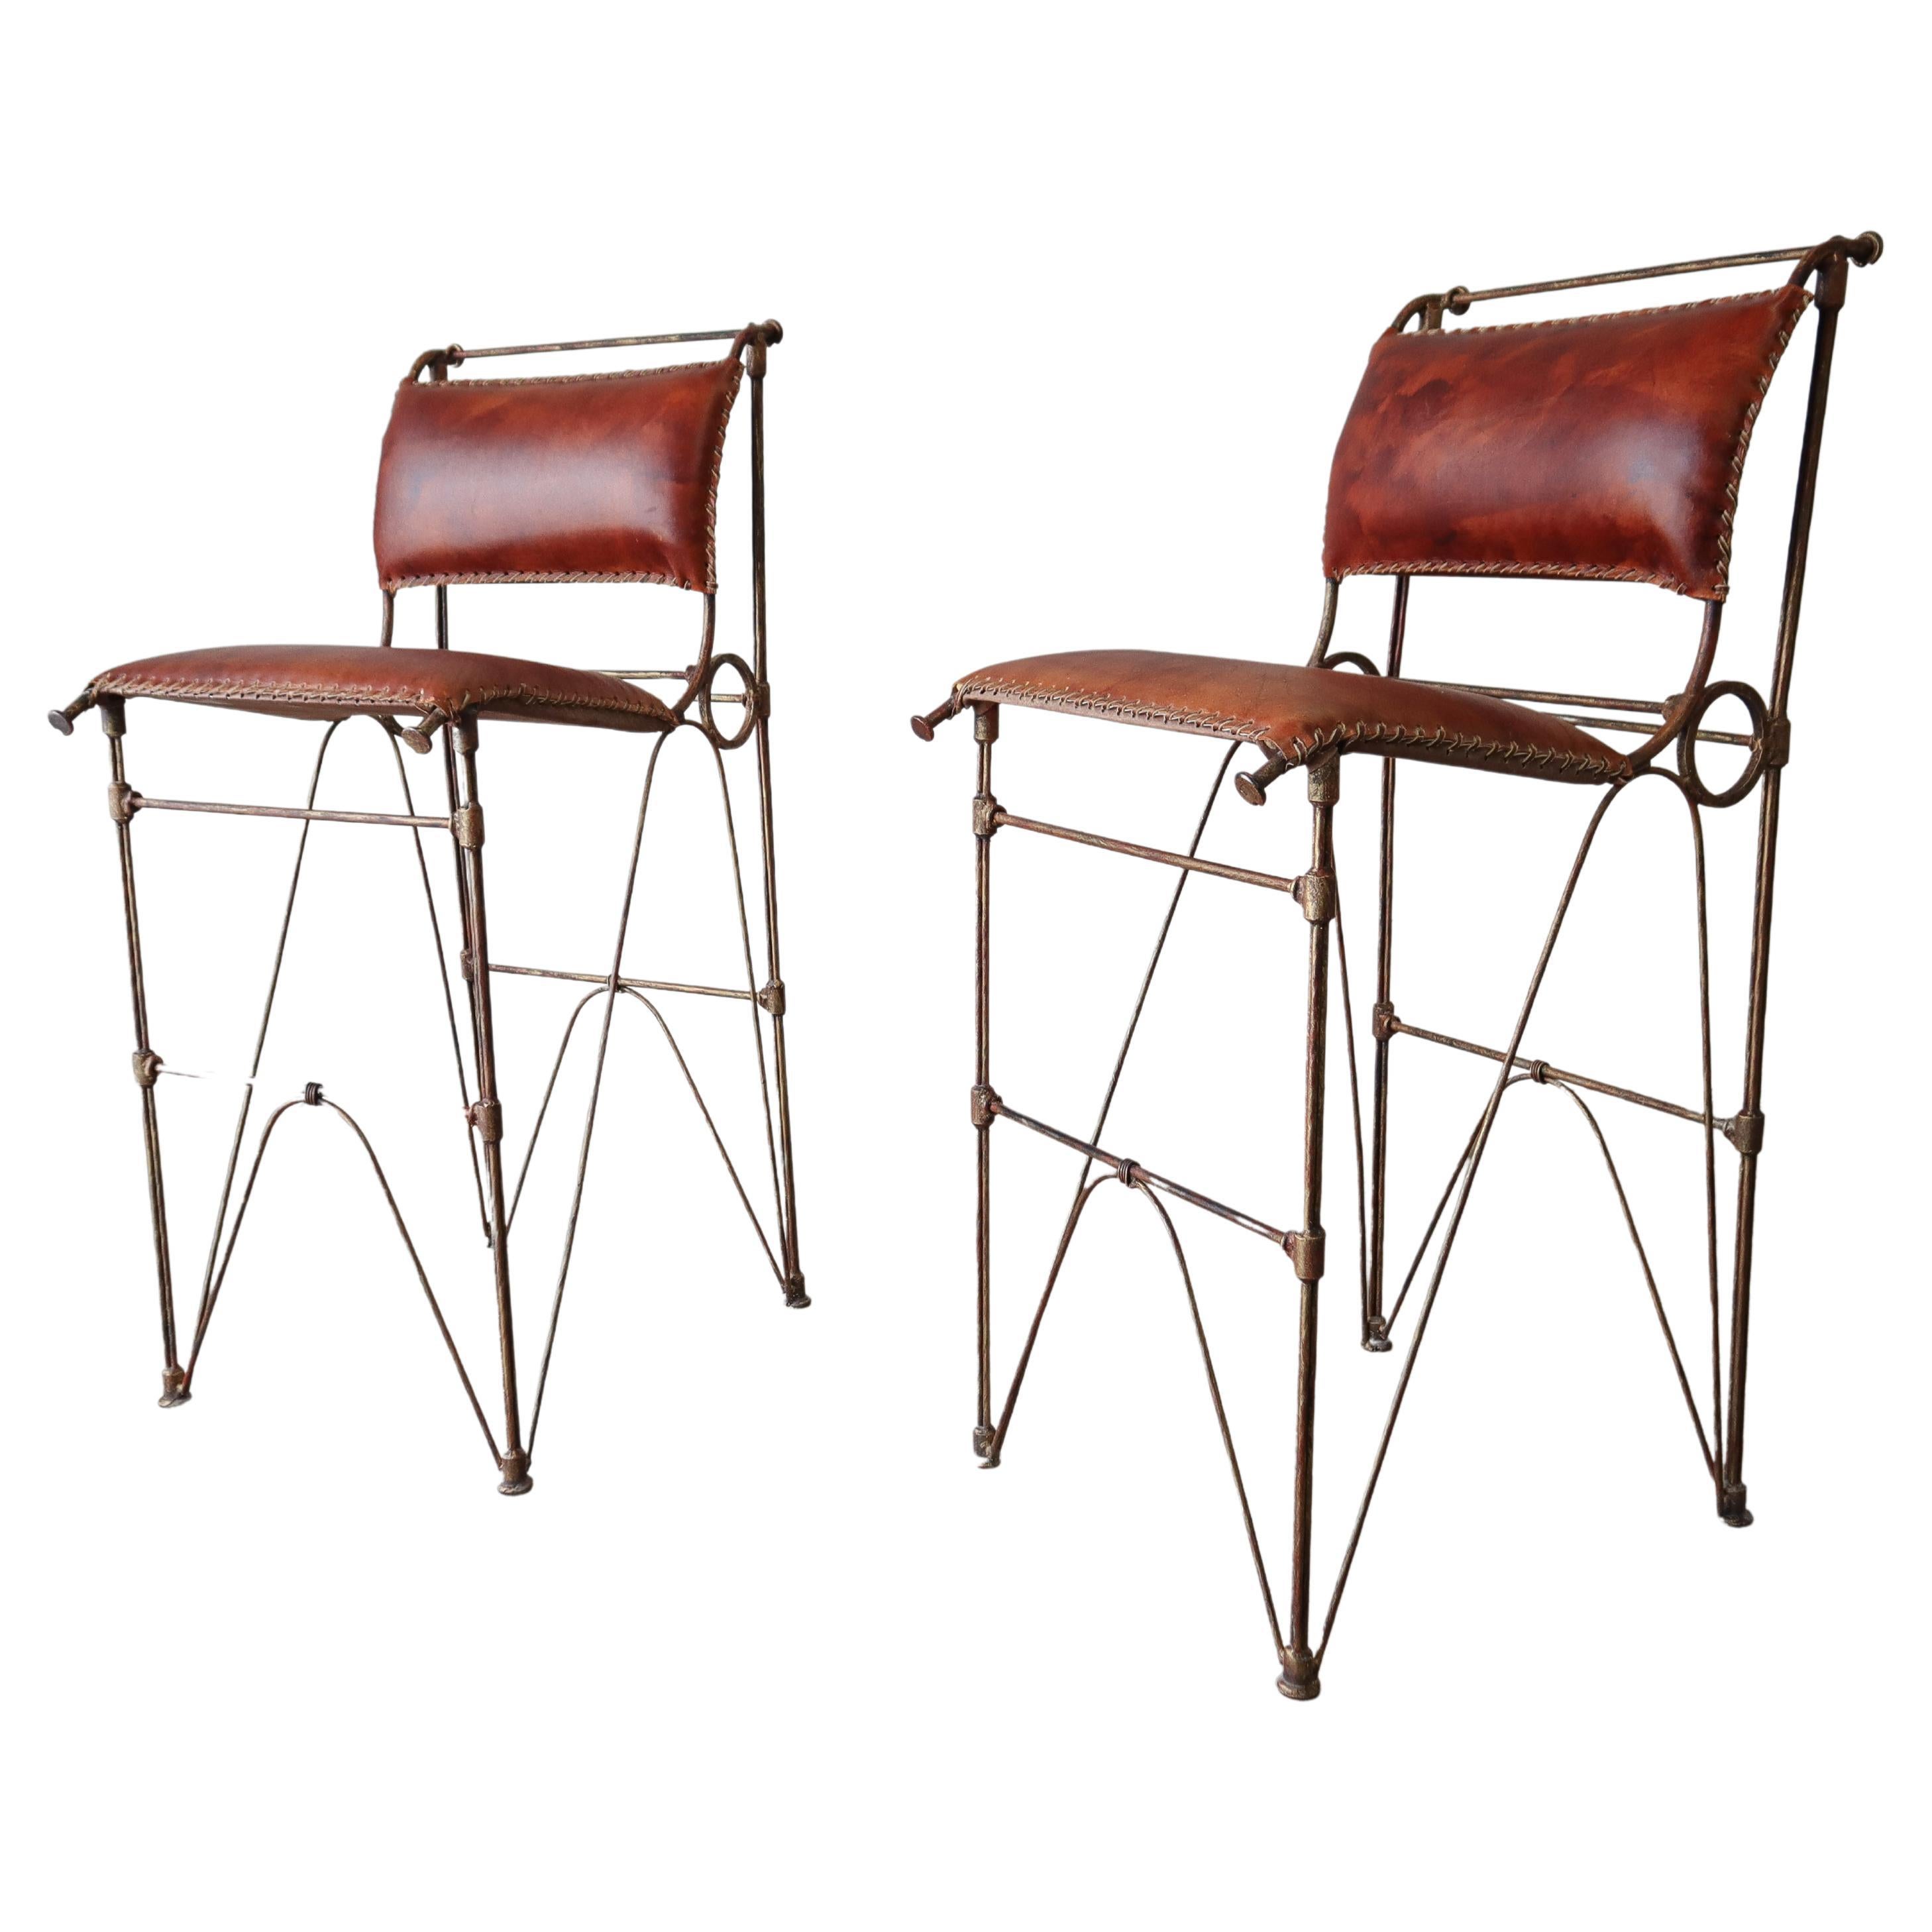 Rustic Pair of Leather Bar Stools by Ilana Goor For Sale